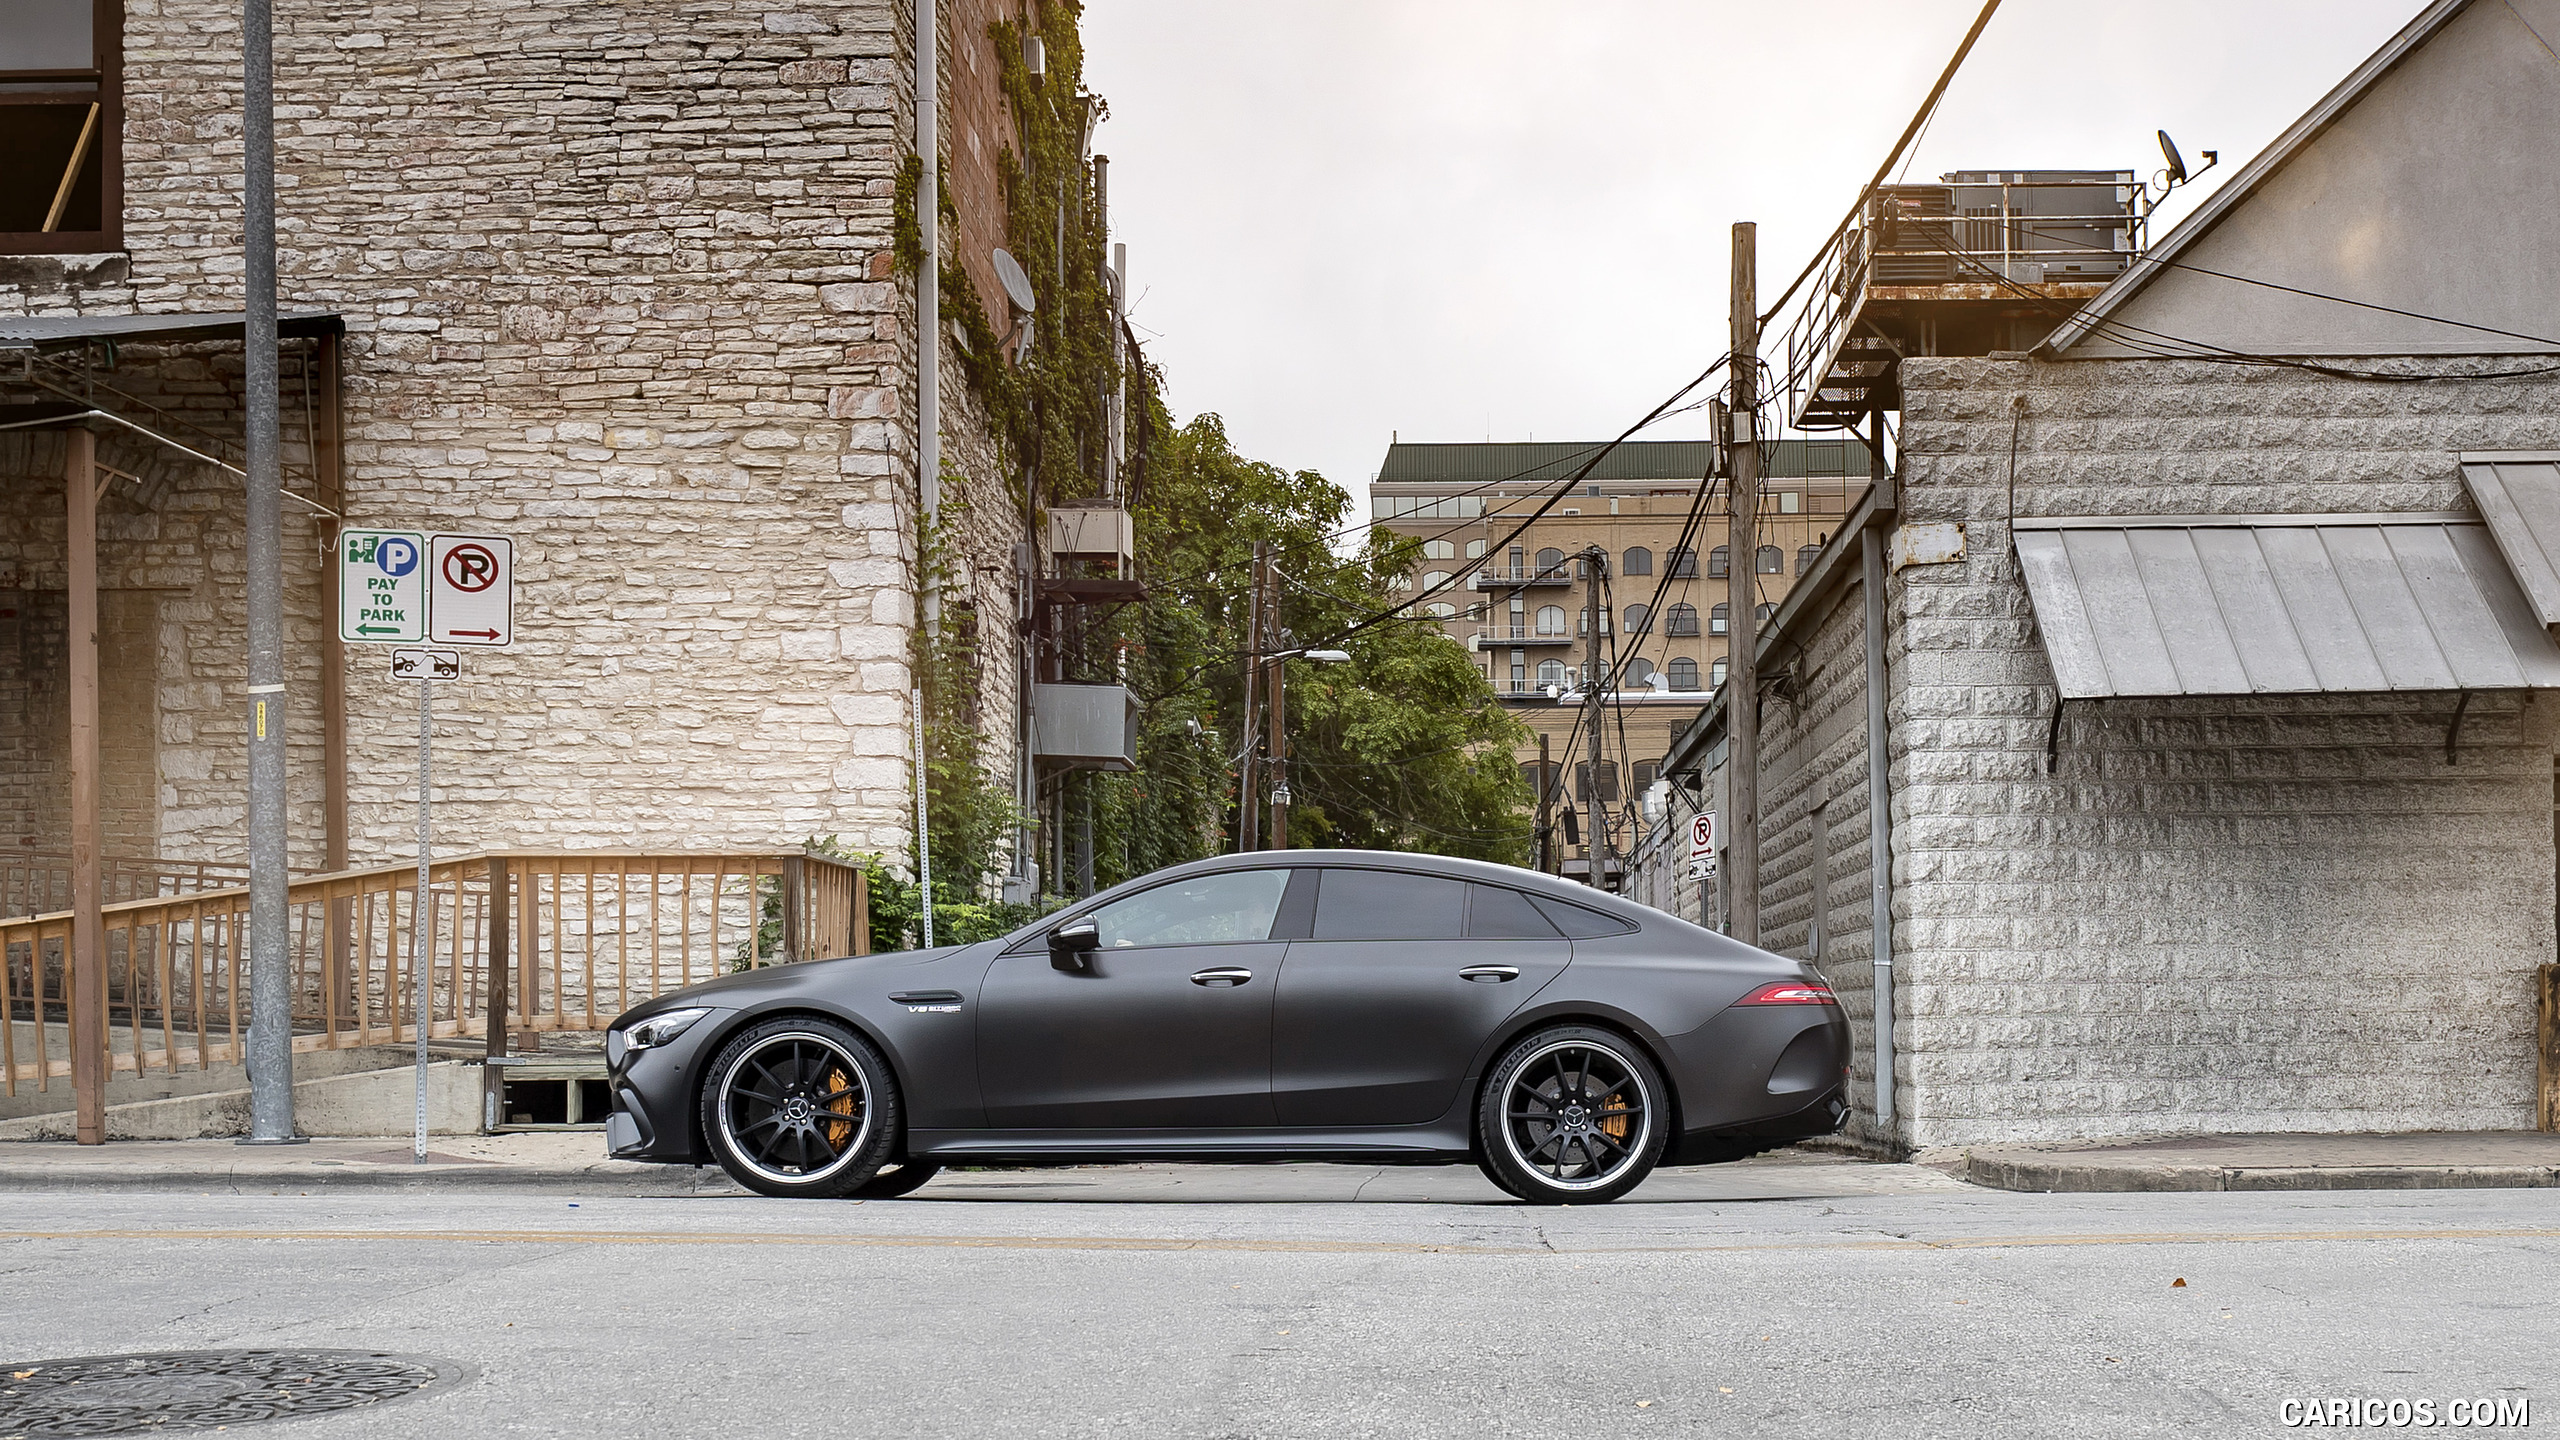 2019 Mercedes-AMG GT 63 S 4MATIC+ 4-Door Coupe - Side, #198 of 427